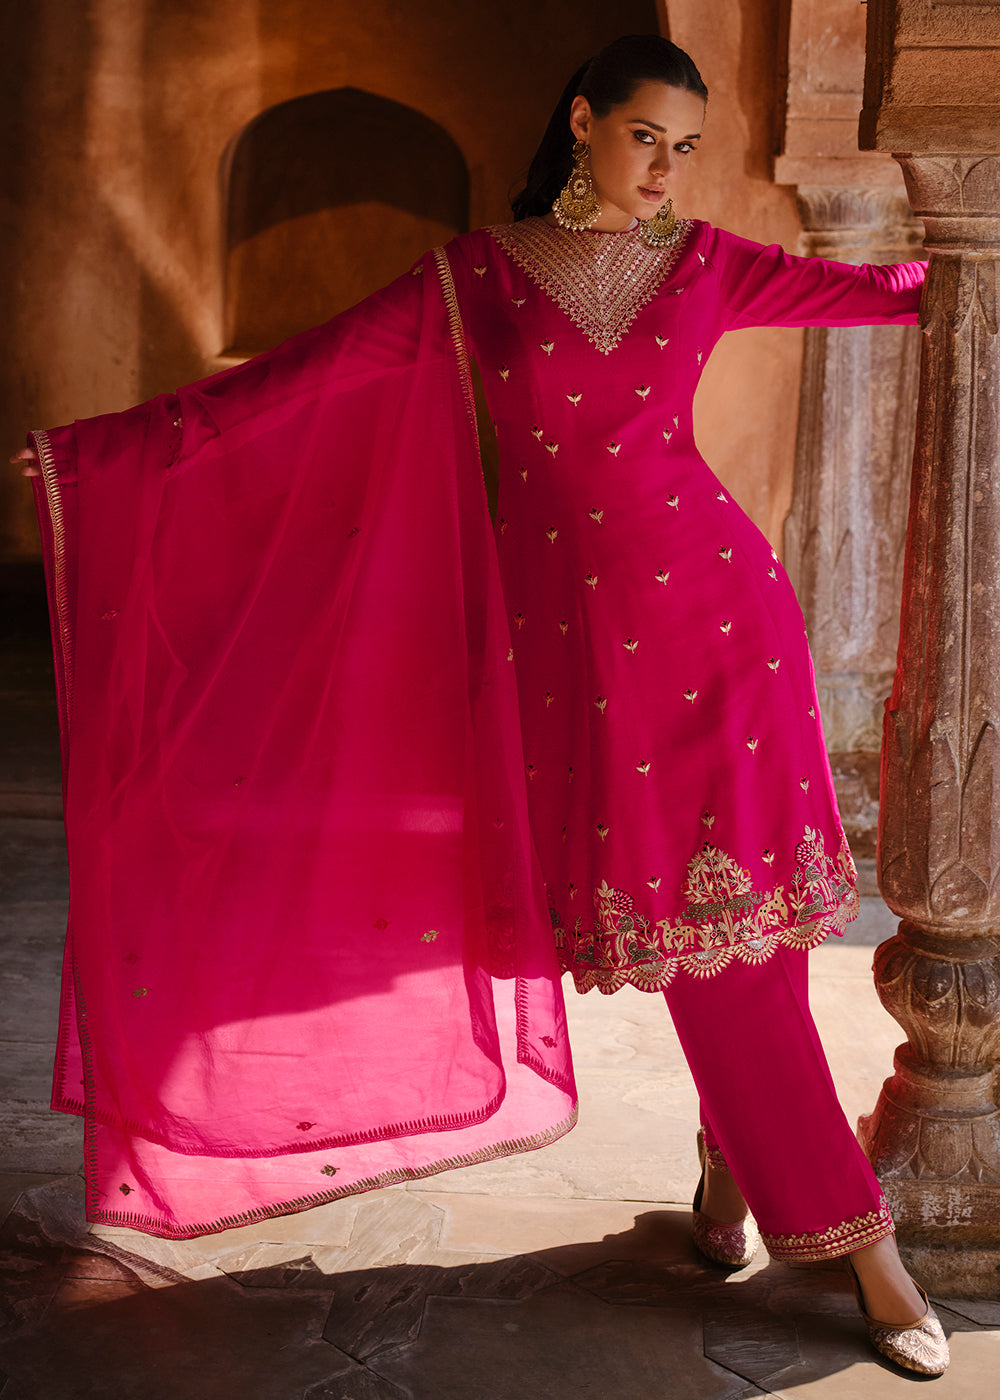 Buy Now Appealing Pink Wedding Festive Embroidered Salwar Suit Online in USA, UK, Canada, Germany, Australia & Worldwide at Empress Clothing.